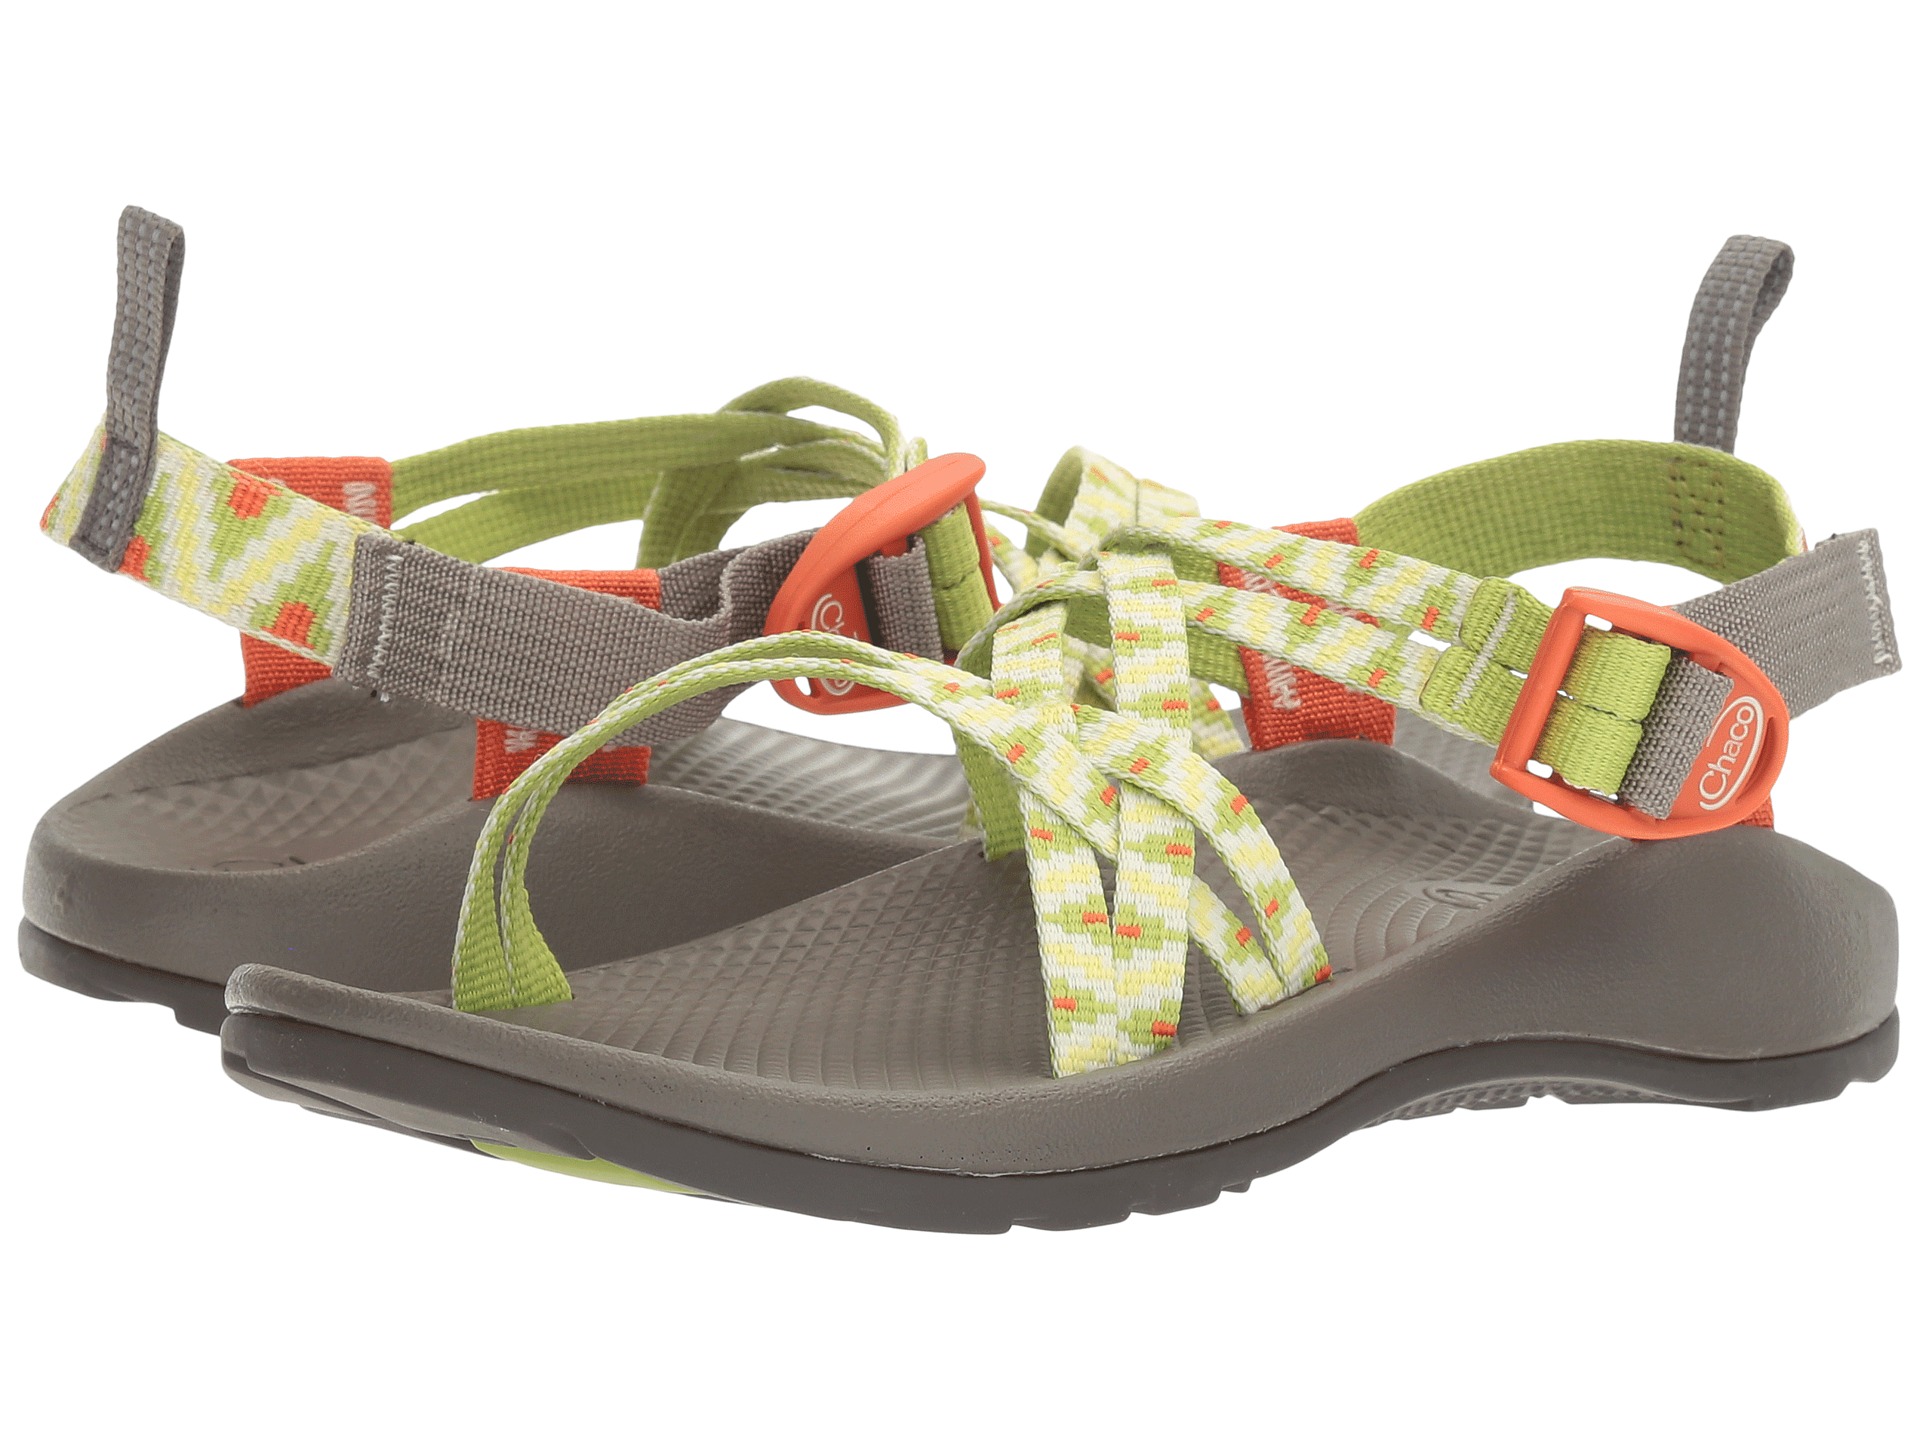 Chaco Kids ZX/1® Ecotread (Toddler/Little Kid/Big Kid) at Zappos.com